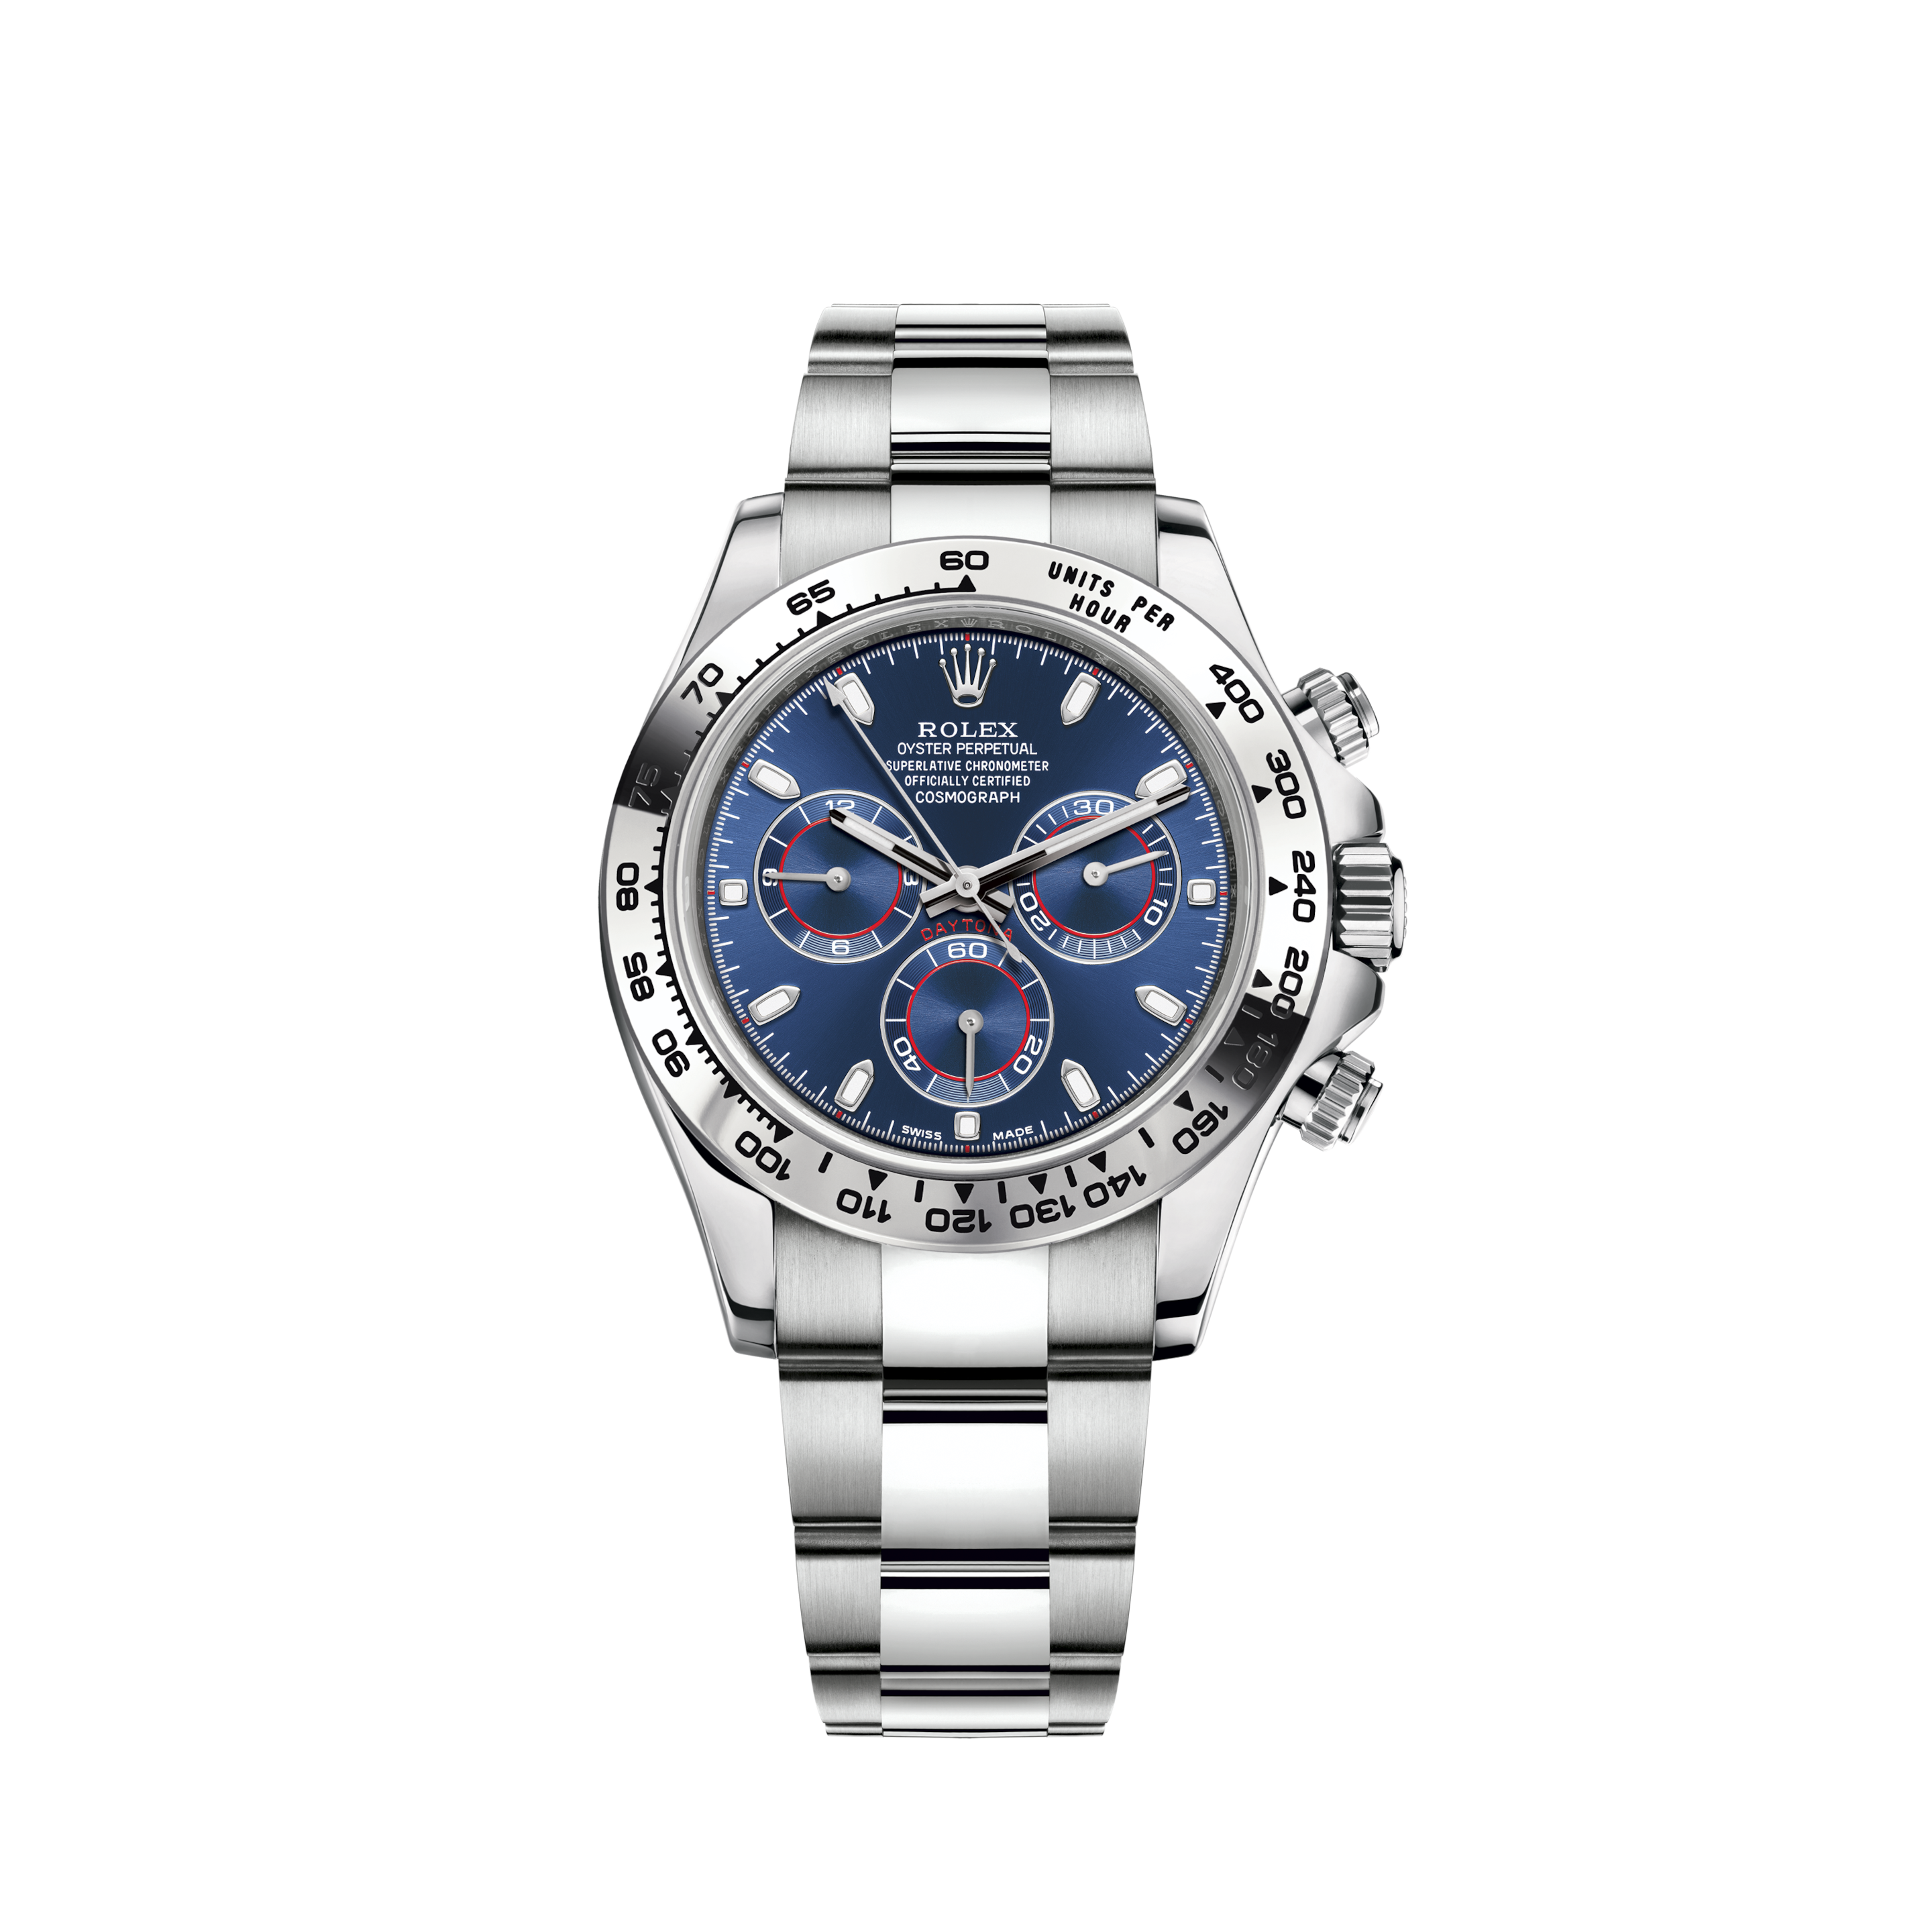 http://www.stunwatches.com